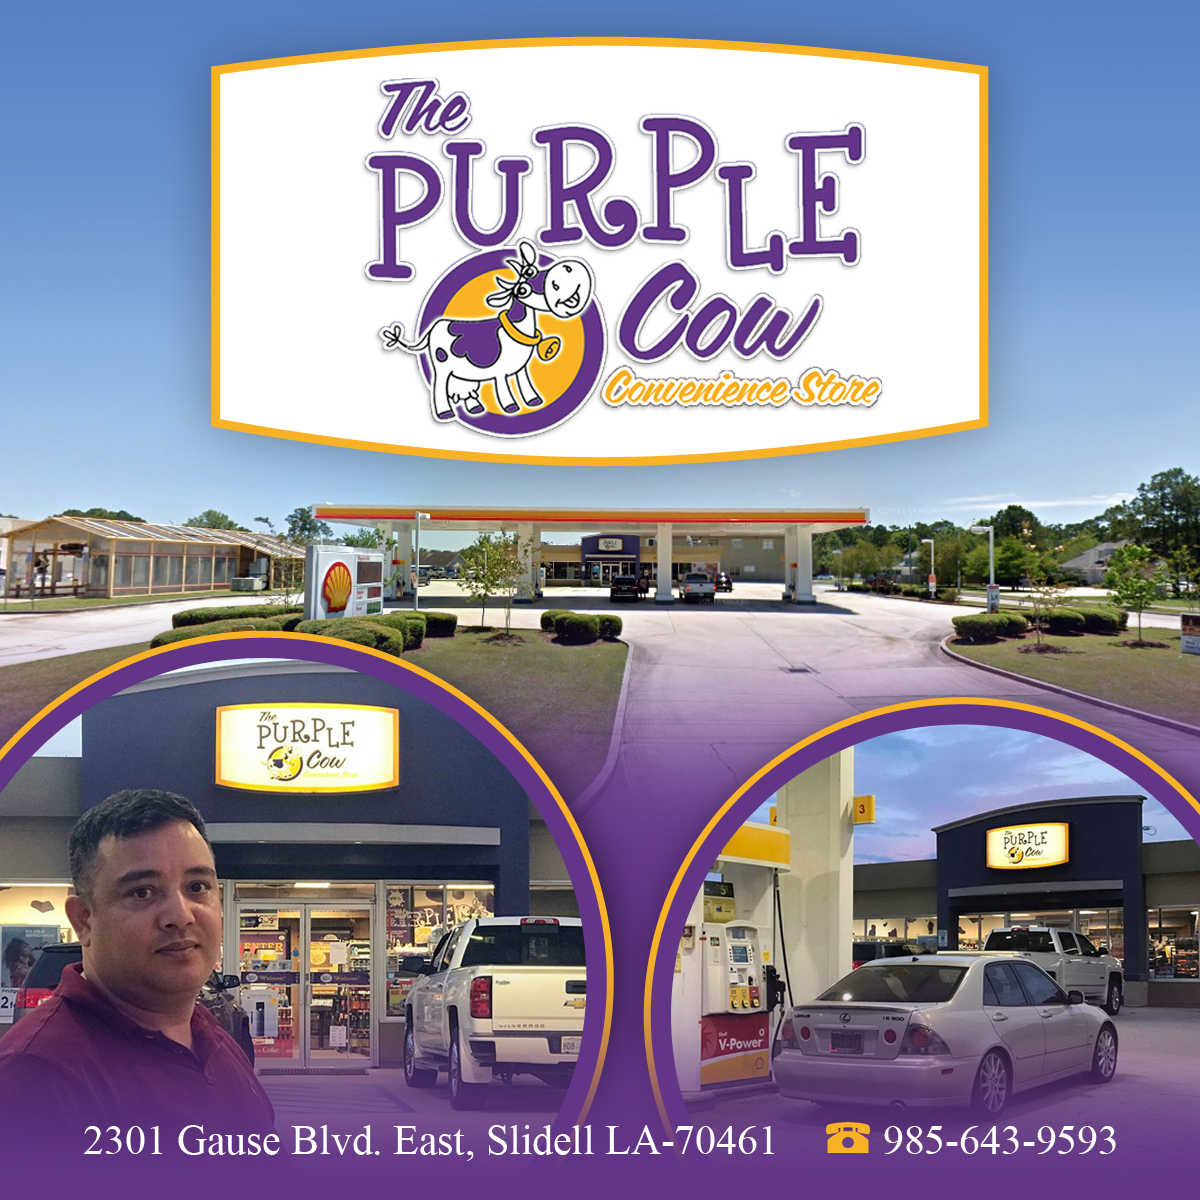 The Purple Cow Convenience Store